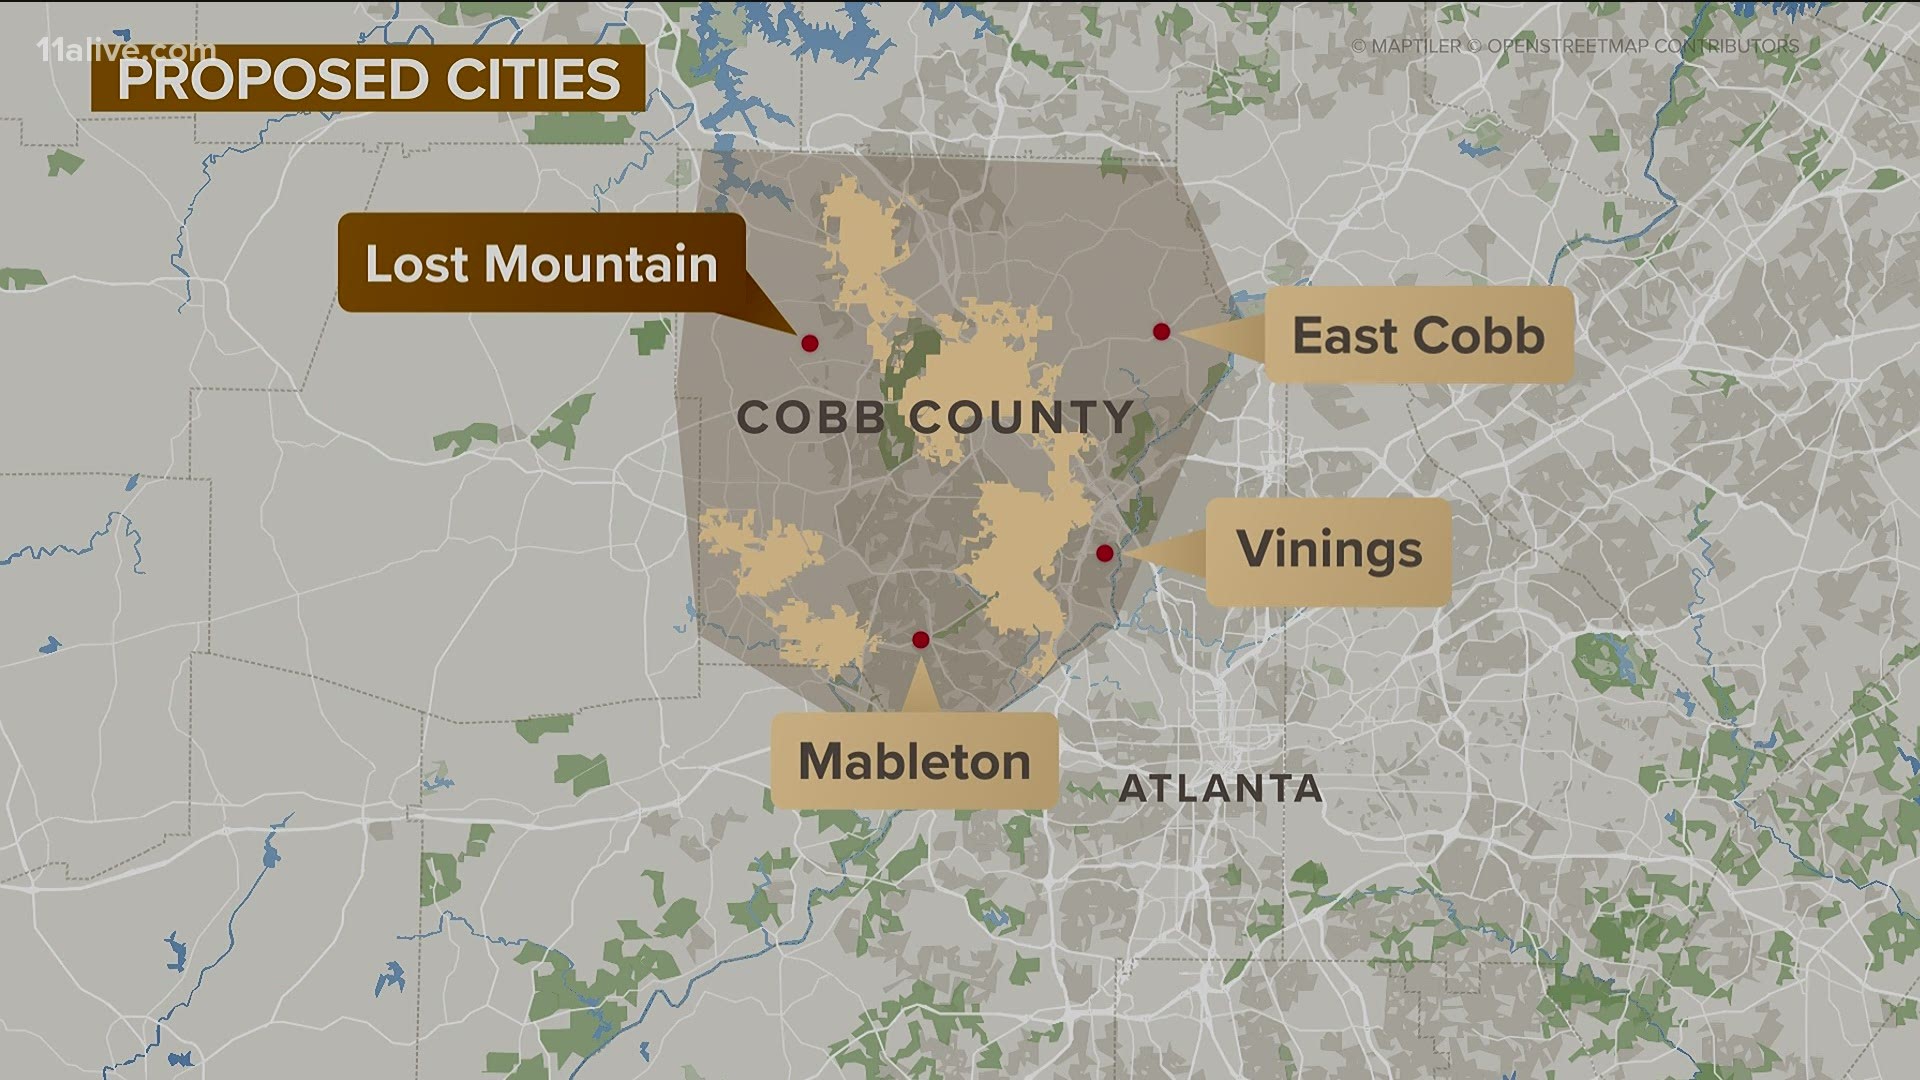 Lost Mountain is a park run by Cobb County’s government. Next year, the park could be the centerpiece for a new city – a bedroom community west of Marietta.